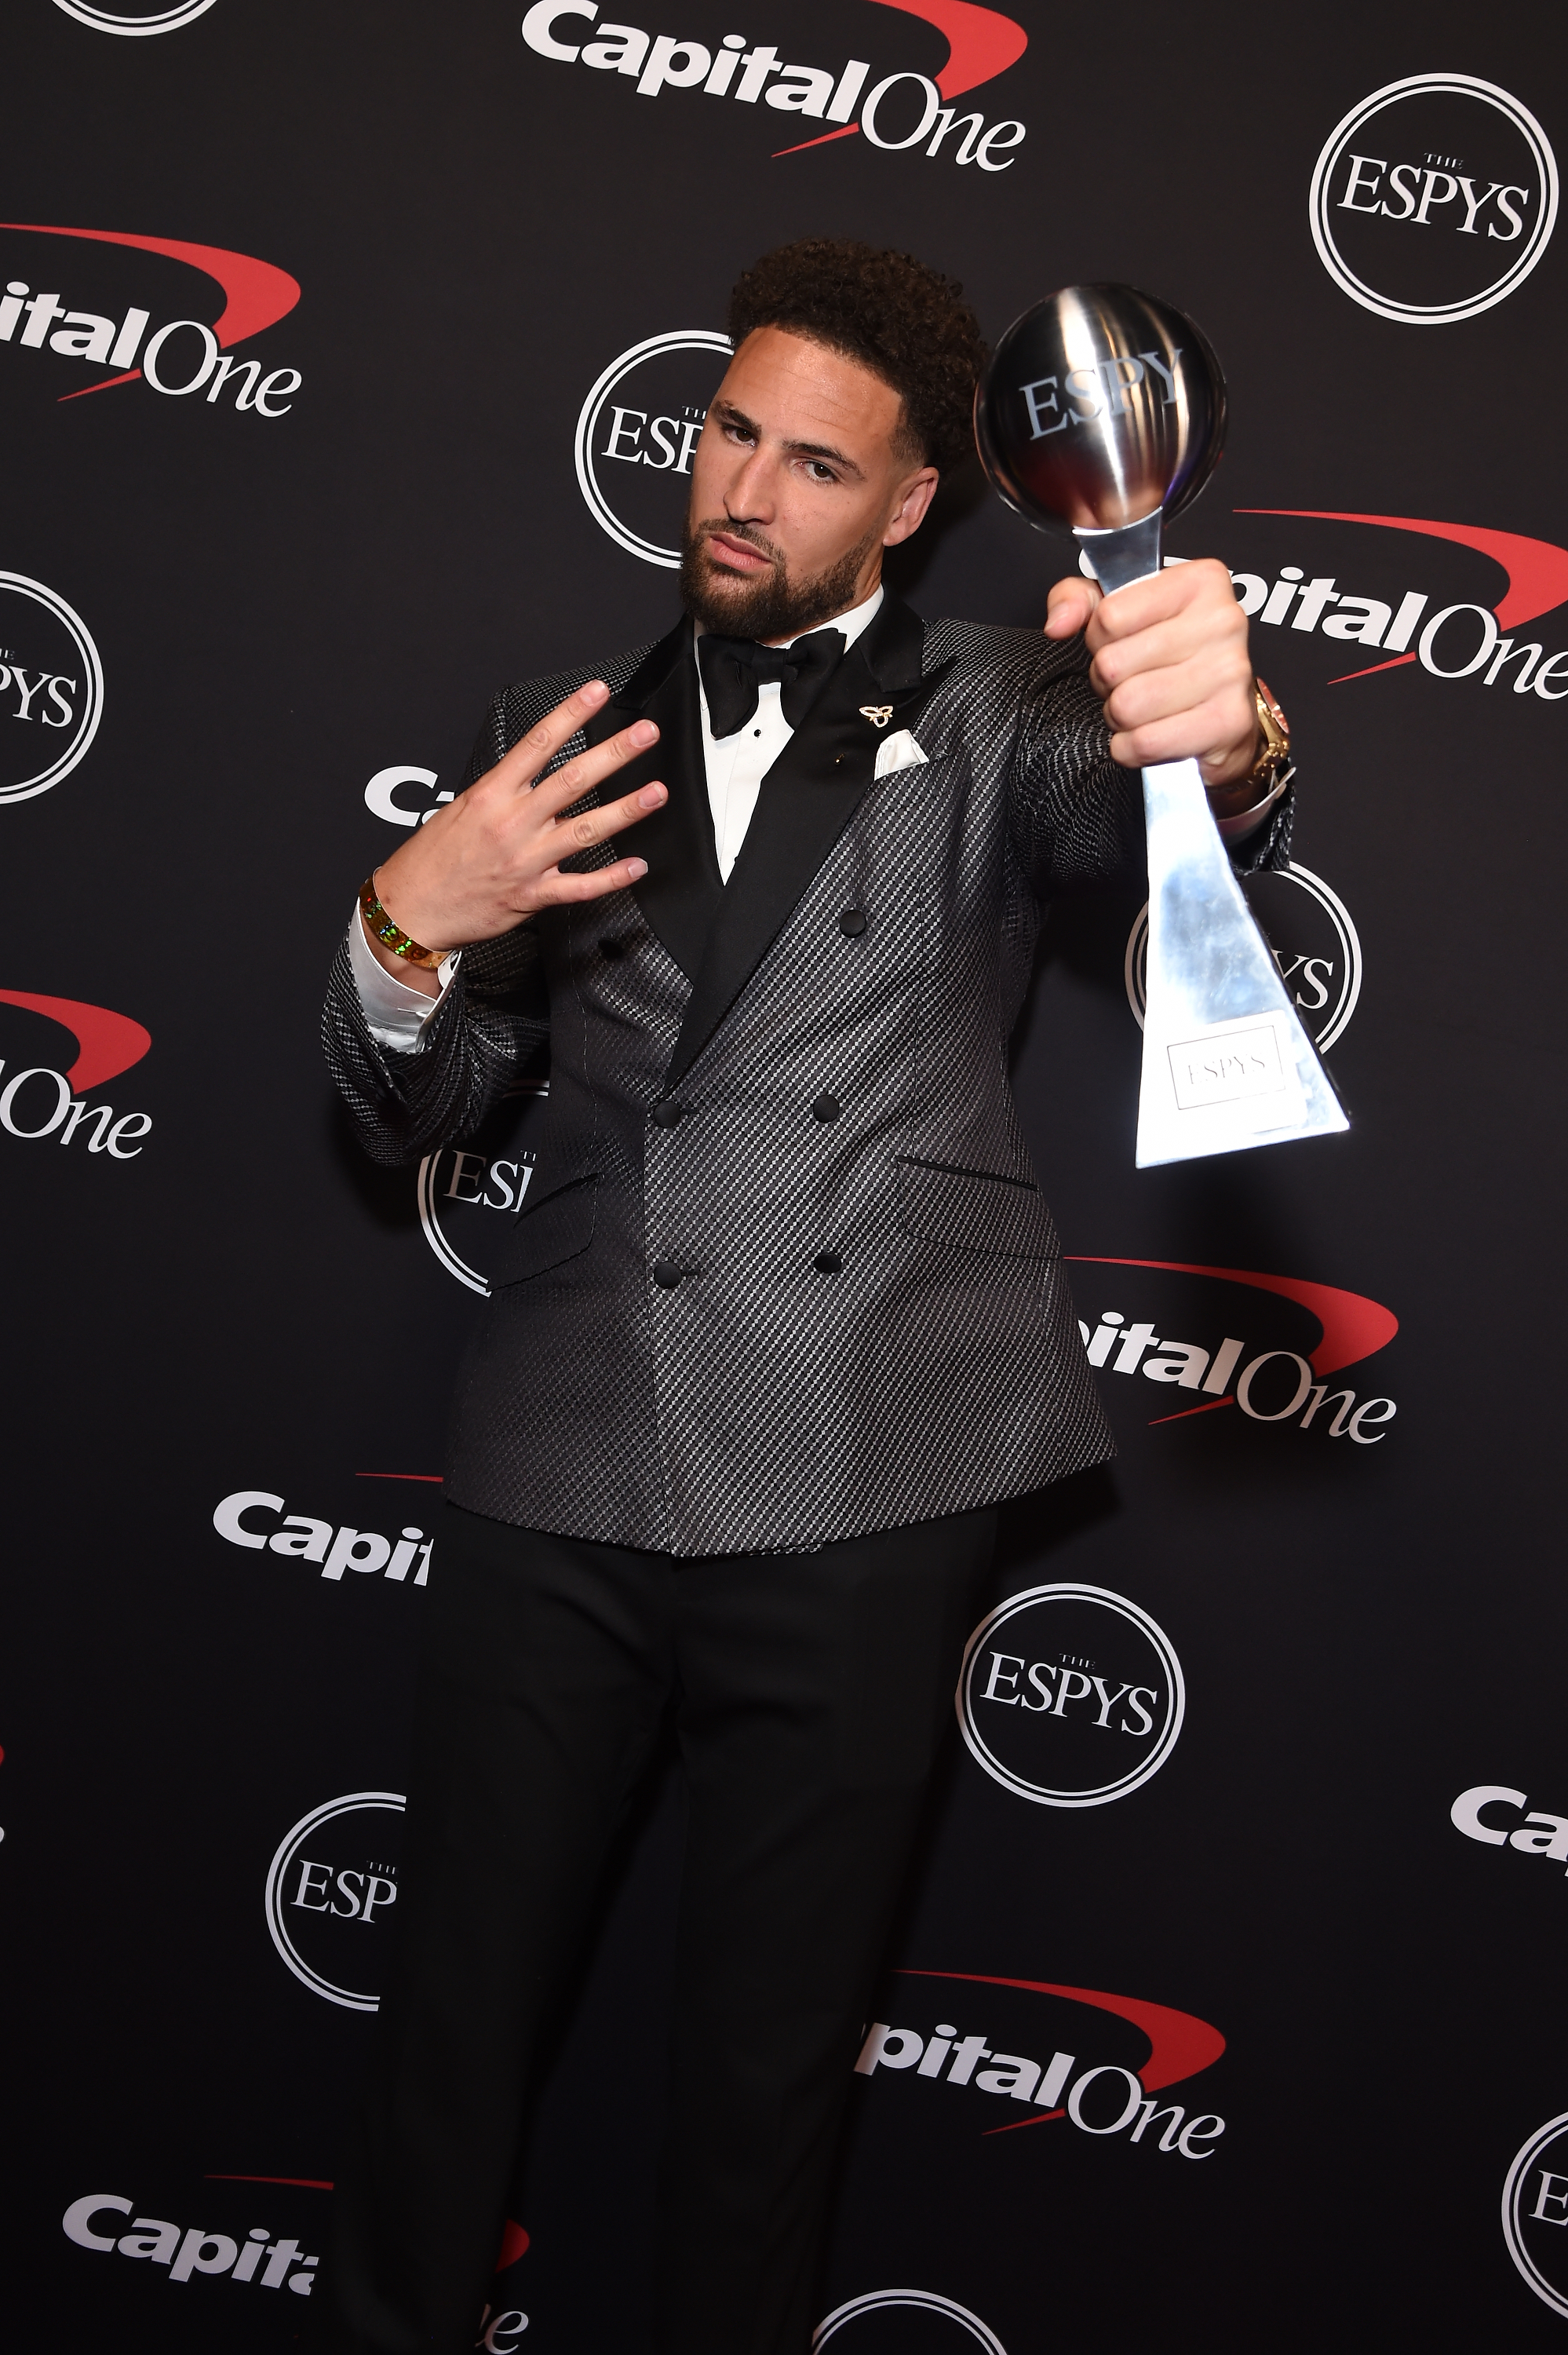 Klay Thompson holding the Larry O’Brien trophy and flashing four fingers while in a suit at the ESPYs 